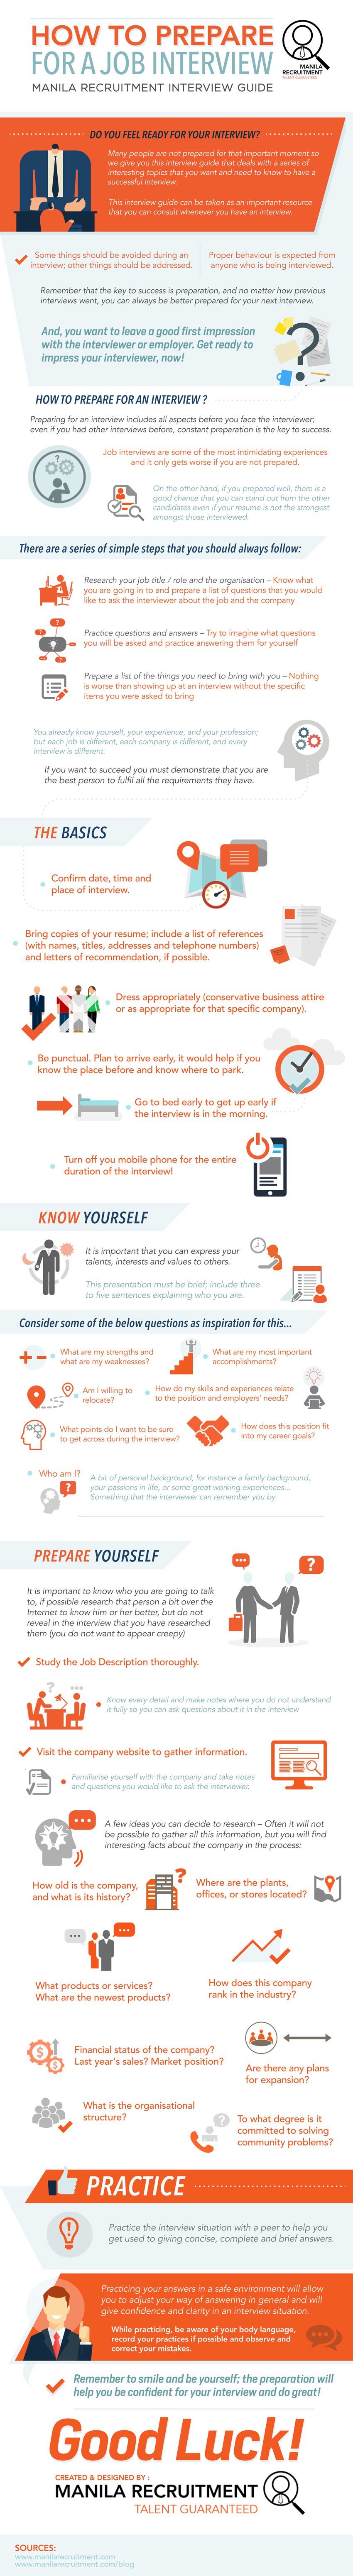 How-To-Prepare-For-A-Job-Interview